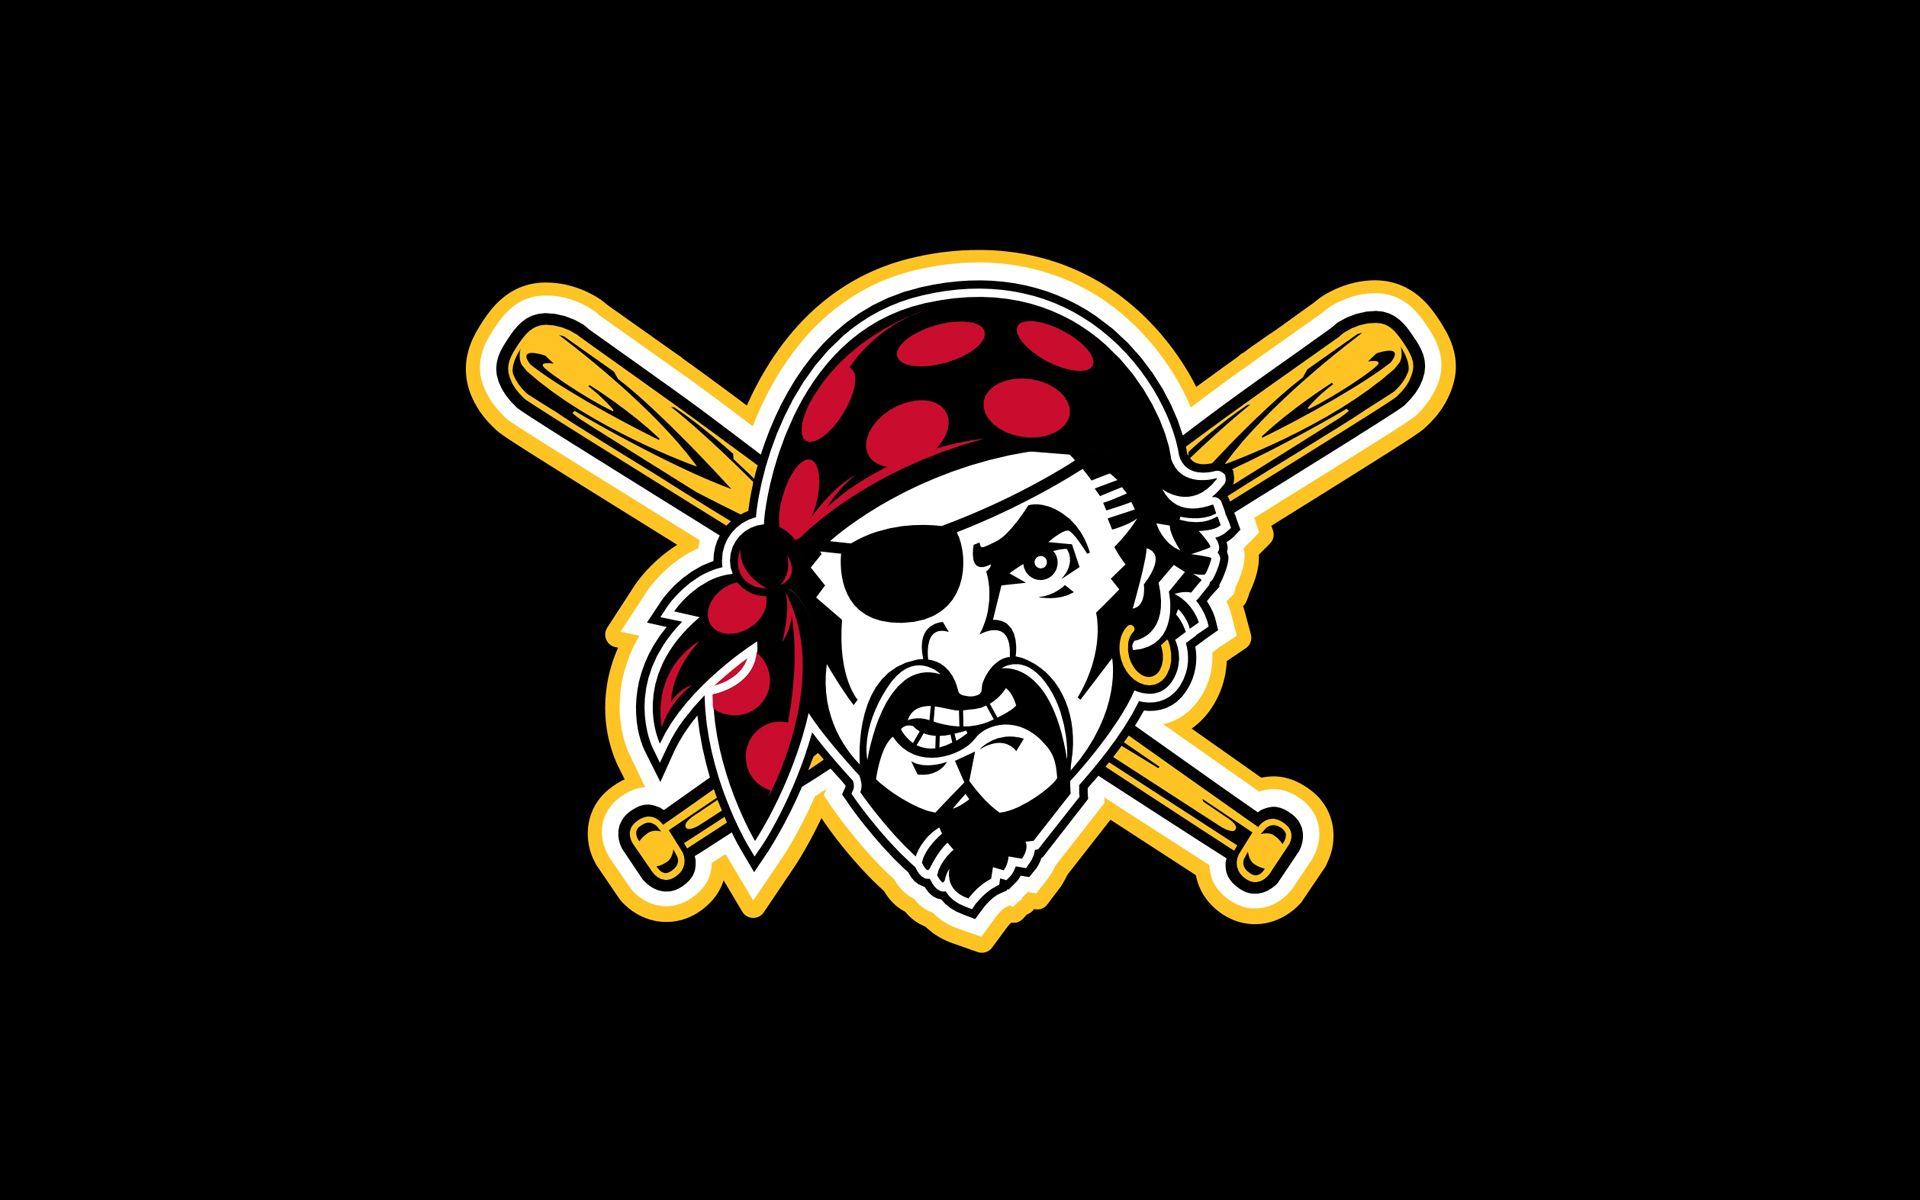 Pittsburgh Pirates Wallpapers